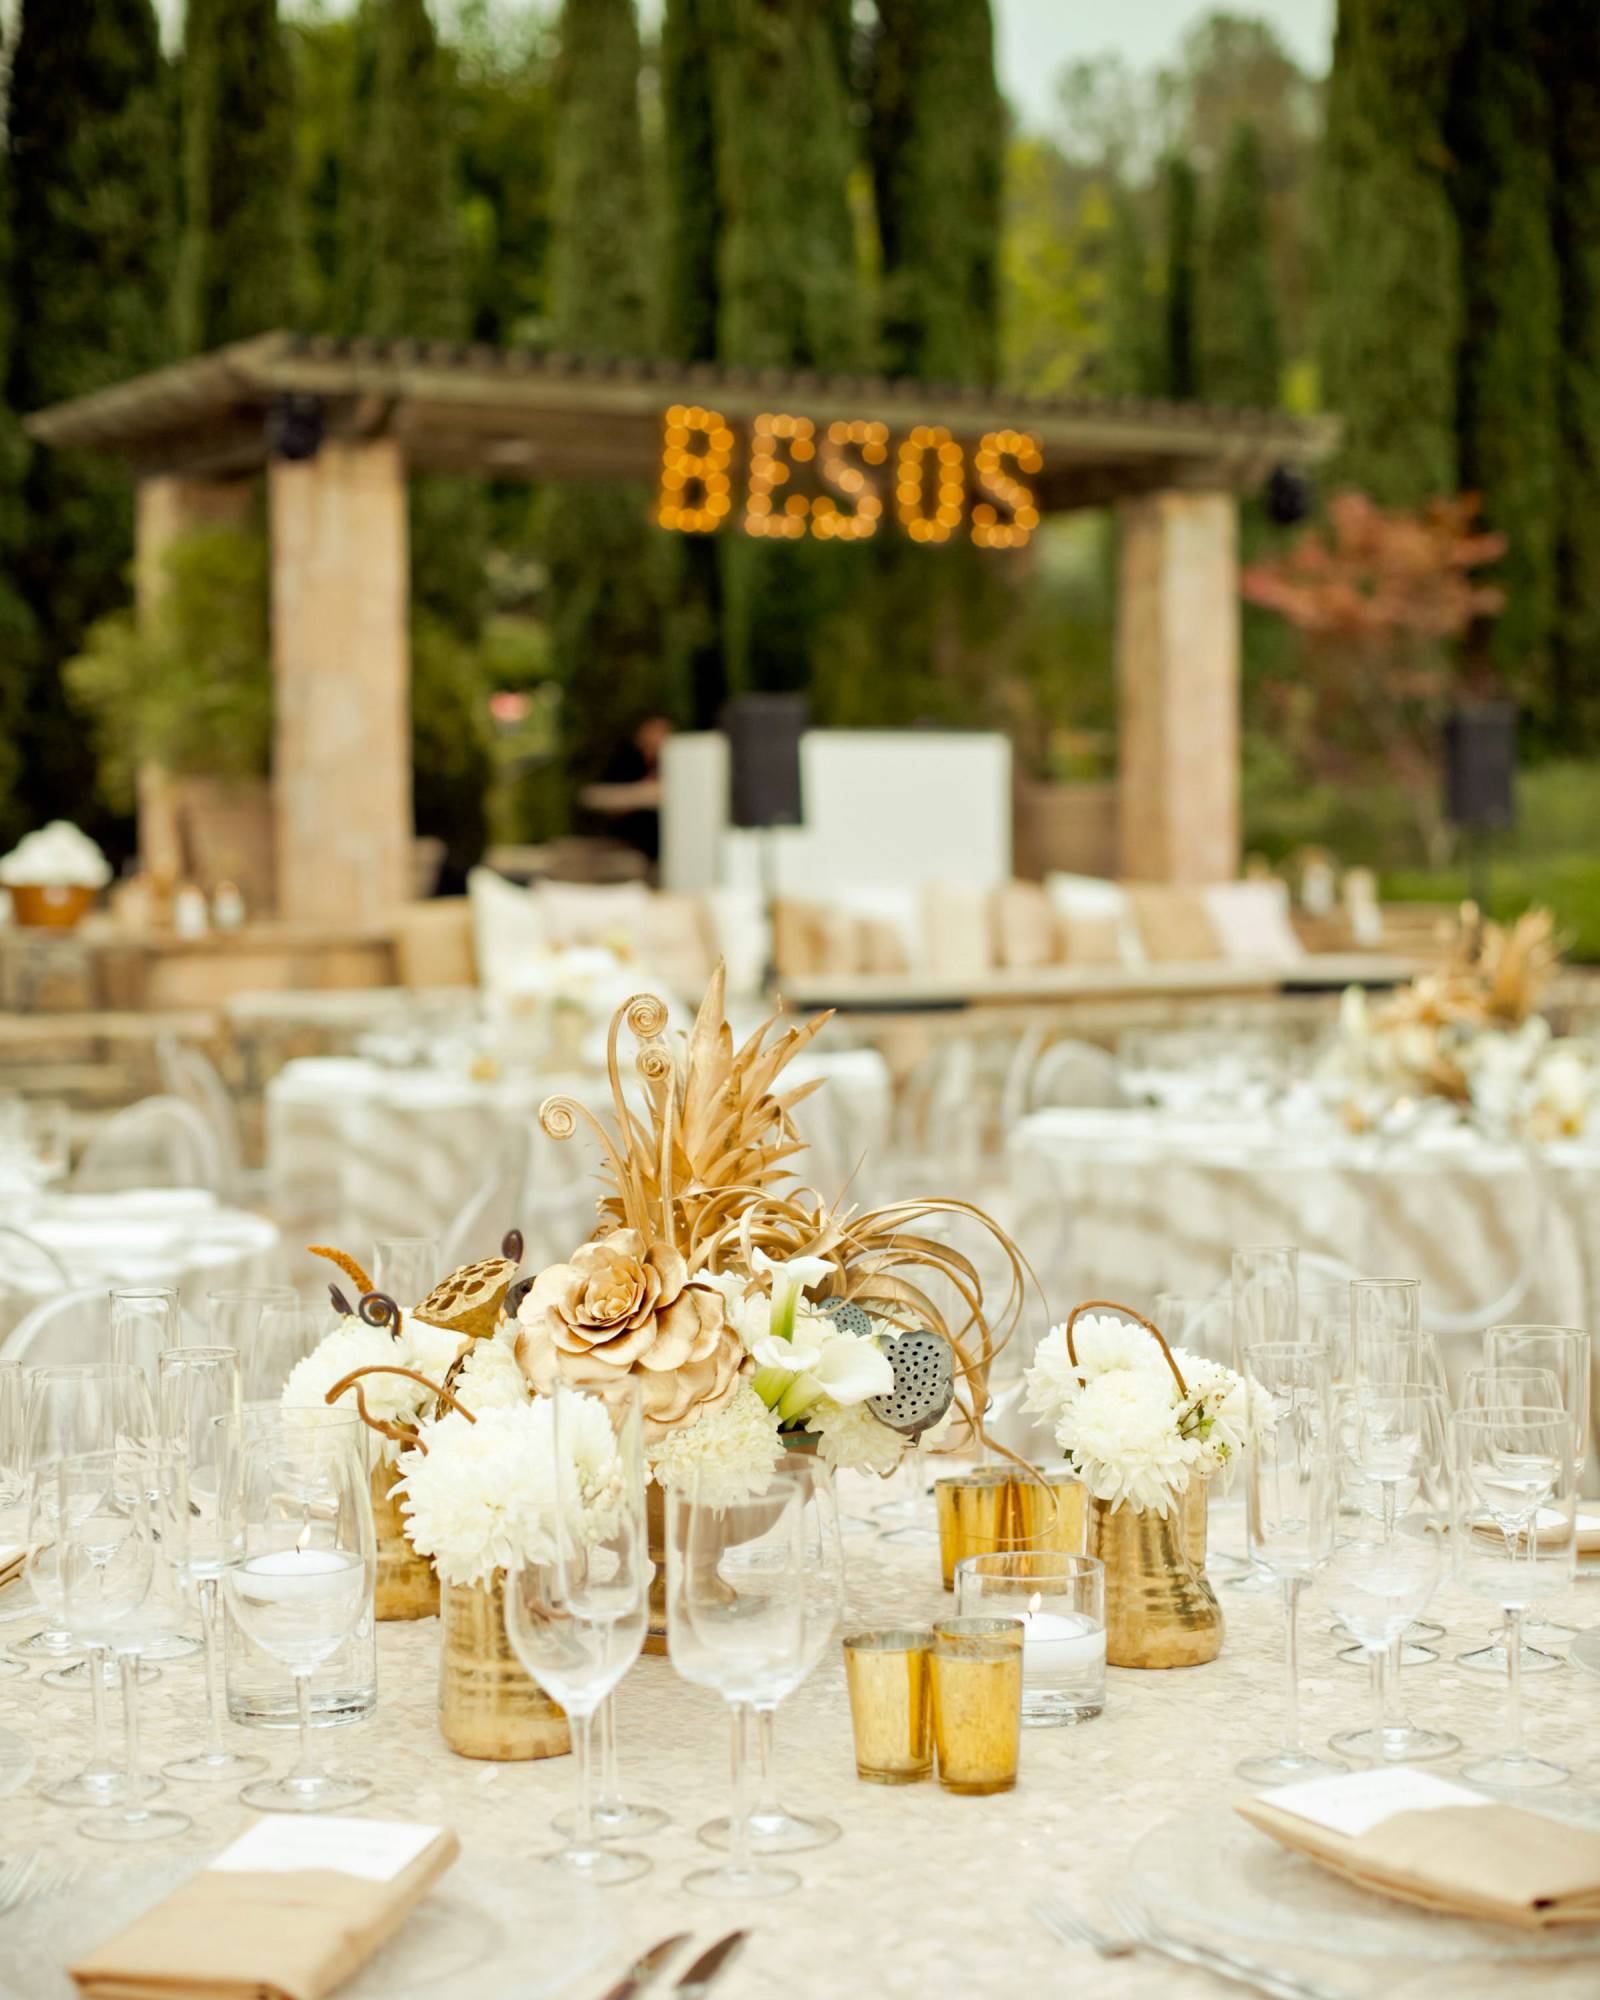 white and gold centerpiece surrounded by gold votives and small vases